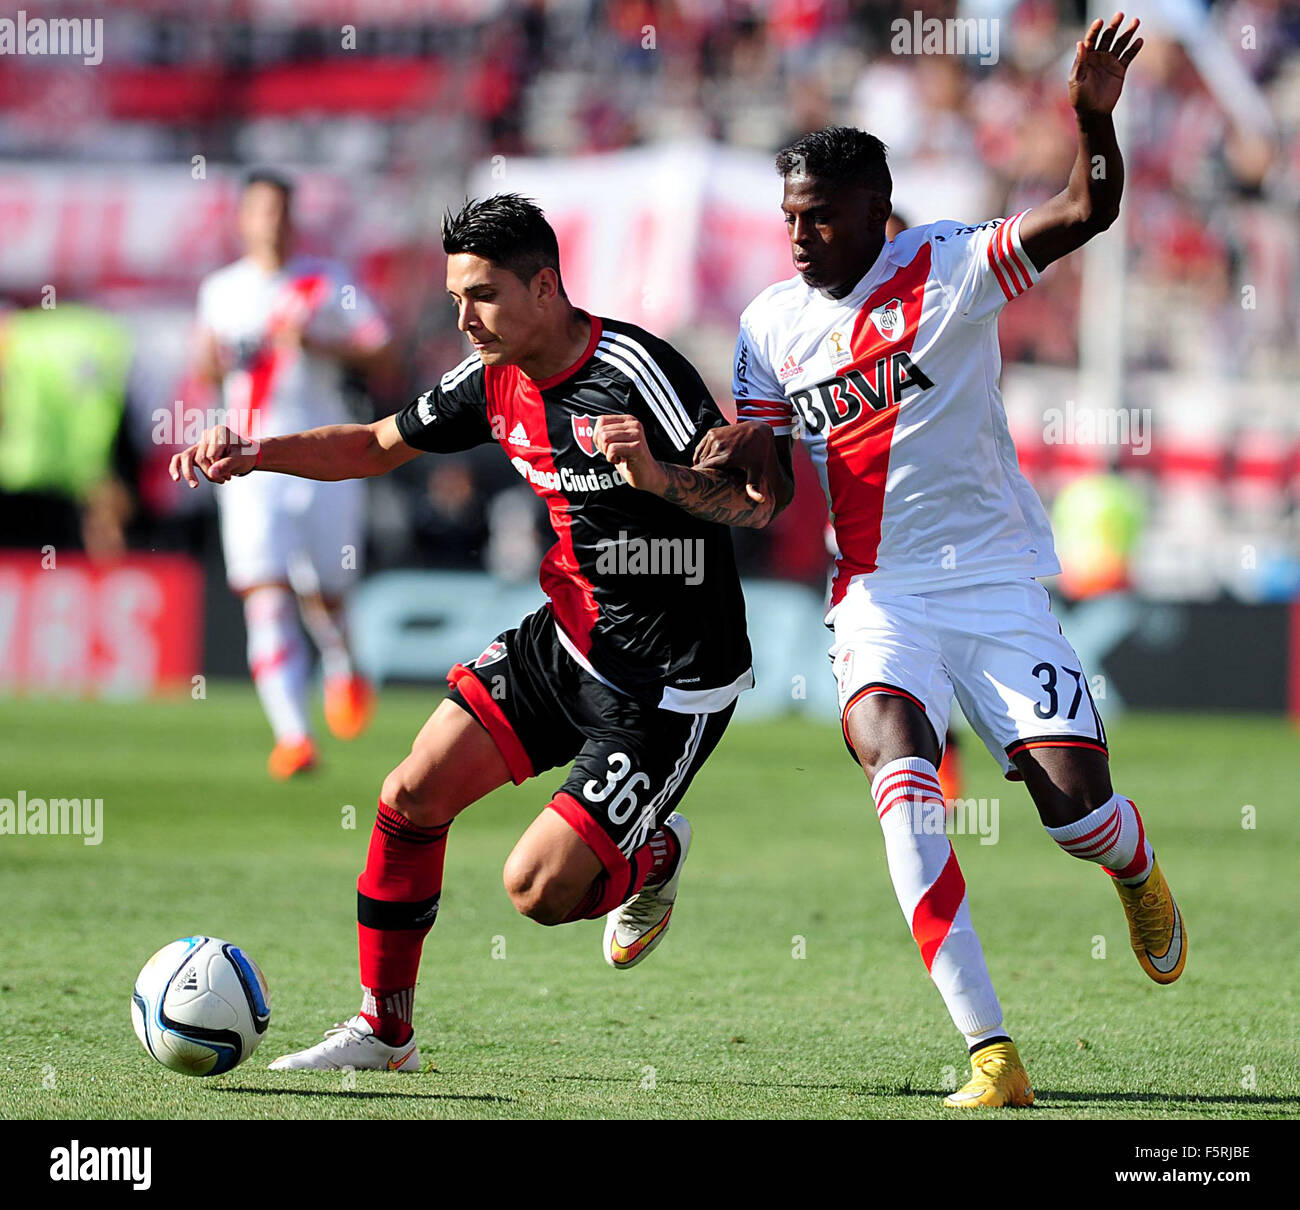 Buenos Aires, Argentina. 8th Nov, 2015. River Plate's Abel Casquete Rodriguez (R) vies the ball with Franco Escobar of Newell's Old Boys during the match of the Argentine First Division Tournament, held at Monumental Antonio Vespucio Liberti stadium, in Buenos Aires city, capital of Argentina, on Nov. 8, 2015. Newell's Old Boys won 2-0. Credit:  Maximiliano Luna/TELAM/Xinhua/Alamy Live News Stock Photo